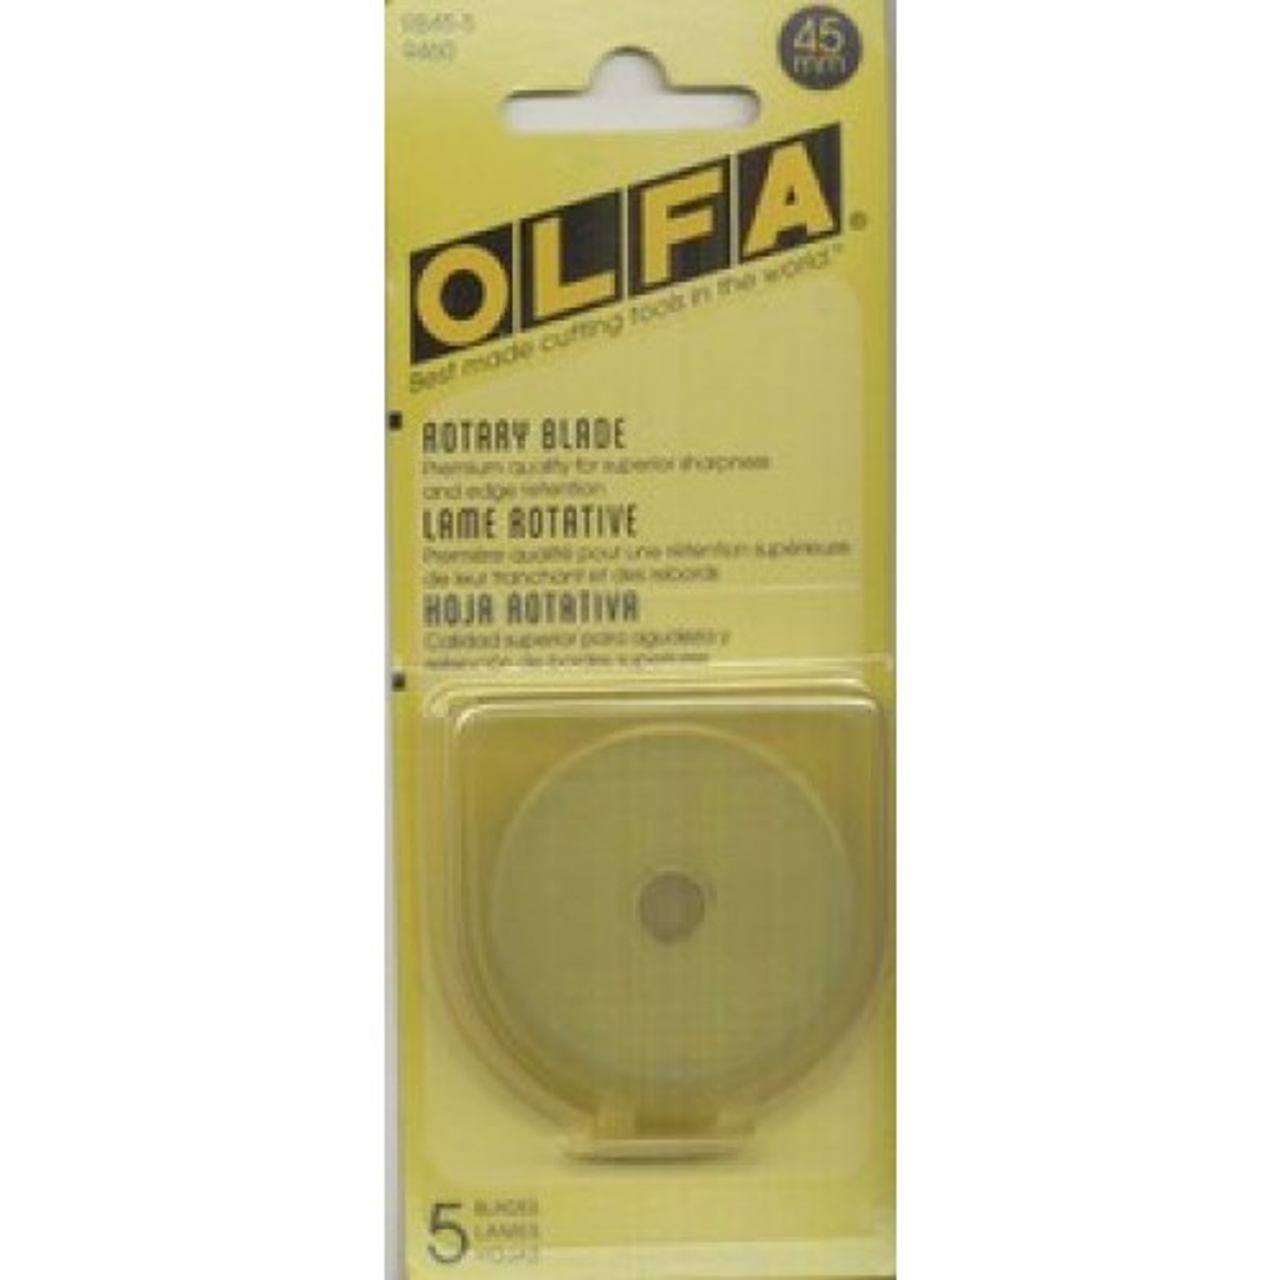 Olfa 45mm Rotary Blades 5pk RB45-5 - Primitive Gatherings Quilt Shop